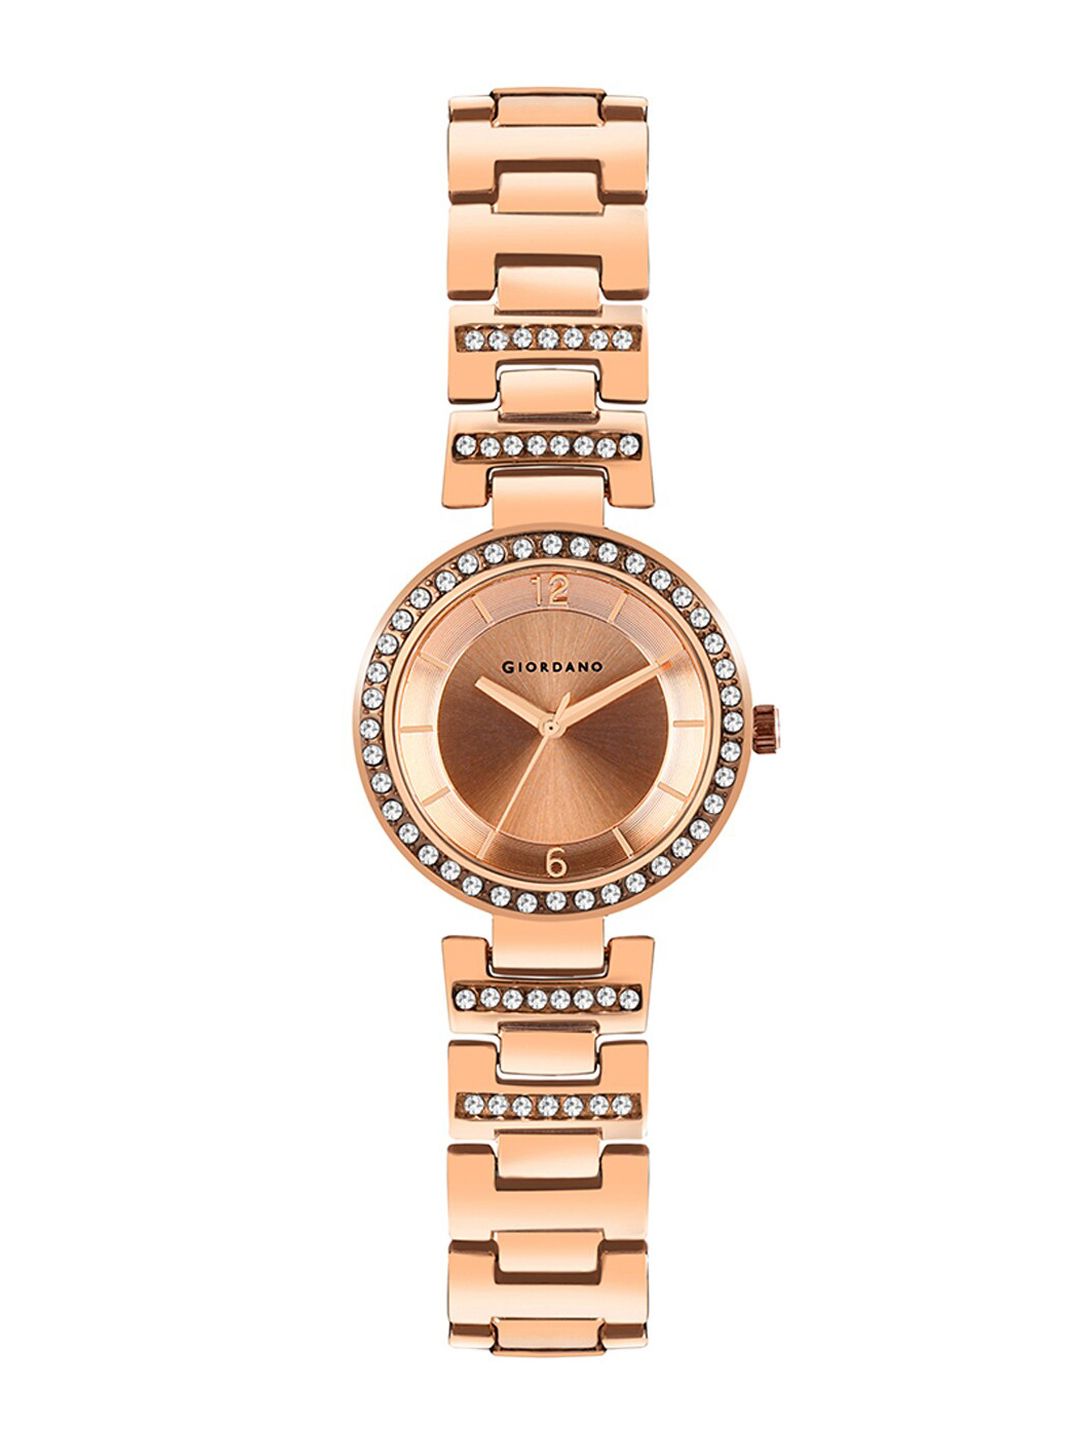 GIORDANO Women Rose Gold Analogue Watch GD4051-33 Price in India